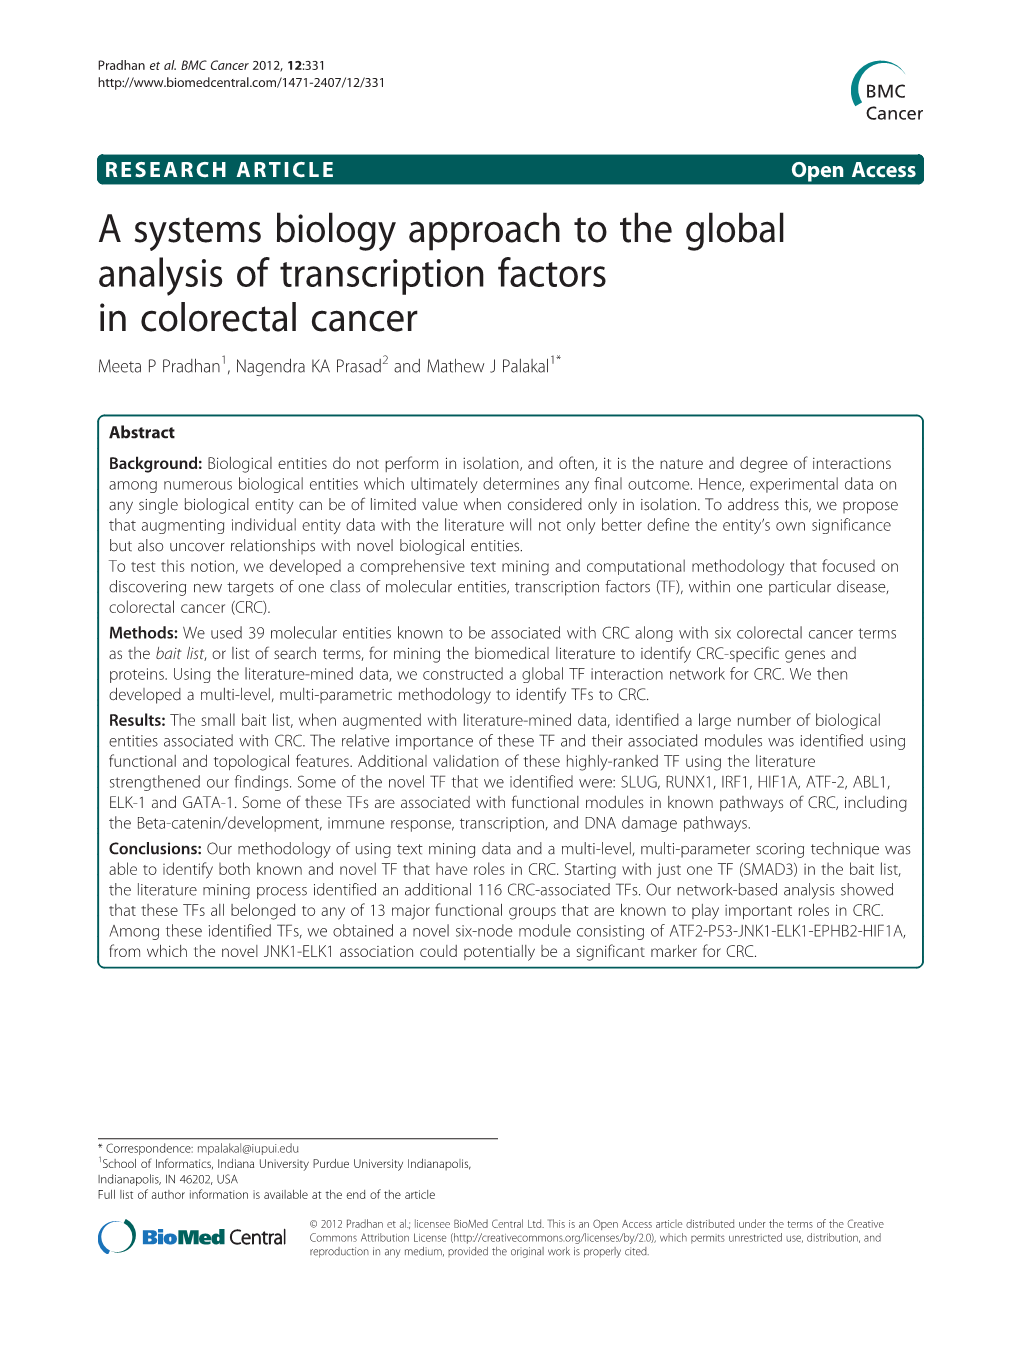 A Systems Biology Approach to the Global Analysis of Transcription Factors in Colorectal Cancer Meeta P Pradhan1, Nagendra KA Prasad2 and Mathew J Palakal1*